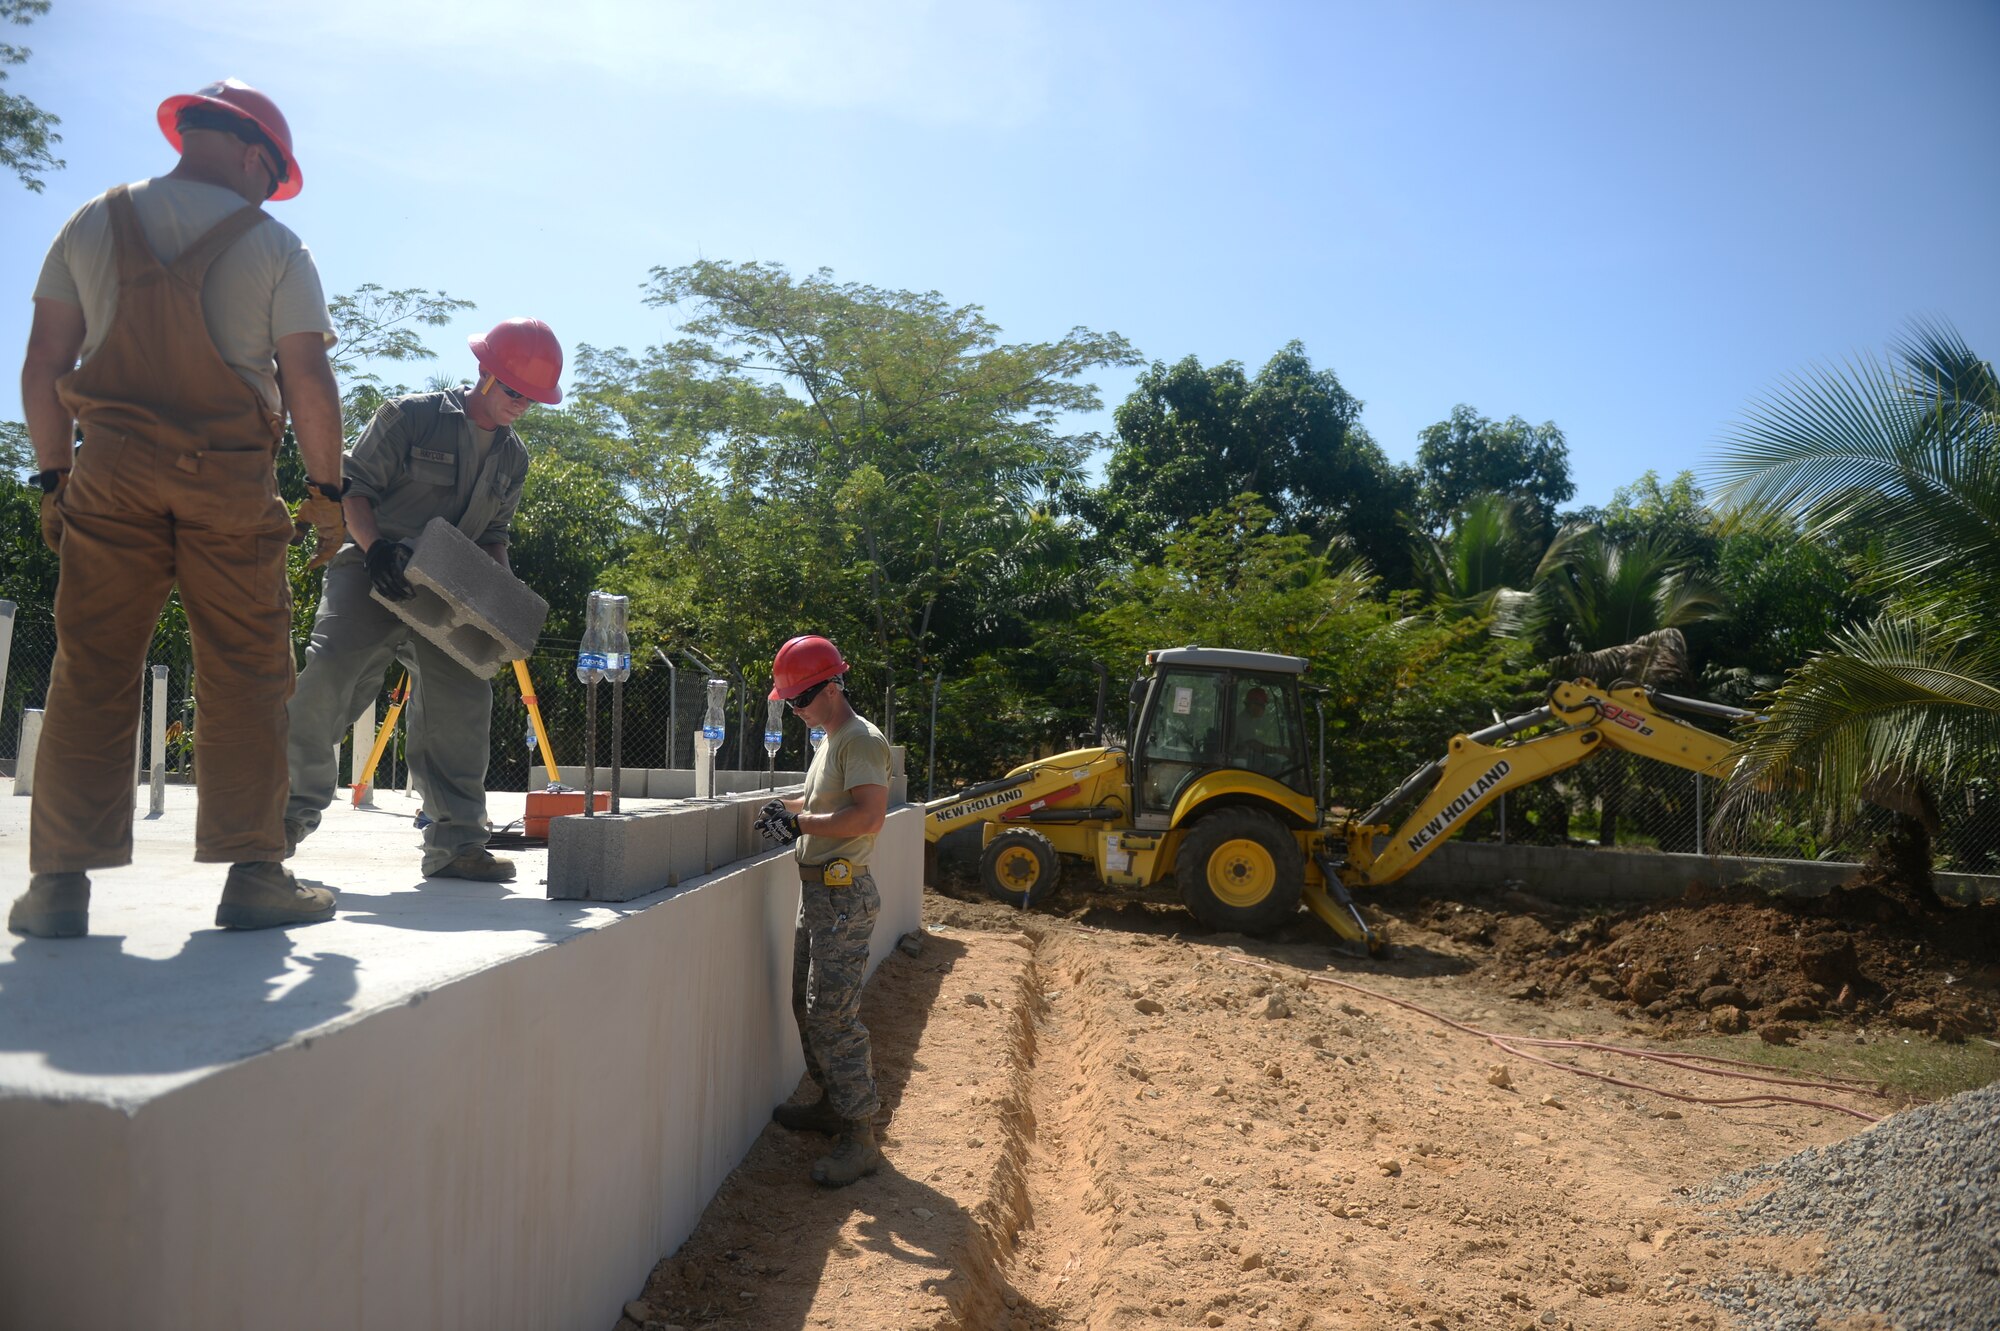 U.S. Air Force Airmen with the 823rd Expeditionary RED HORSE Squadron out of Hurlburt Field, Fla., prepare the first layer of brick, or the first course, in the construction of a new two-classroom building at the Gabriela Mistrel primary school in Ocotoes Alto, Honduras, June 1, 2015. New Horizons was launched in the 1980s and is an annual joint humanitarian assistance exercise that U.S. Southern Command conducts with a partner nation in Central America, South America or the Caribbean. The exercise improves joint training readiness of U.S. and partner nation civil engineers, medical professionals and support personnel through humanitarian assistance activities. (U.S. Air Force photo by Capt. David J. Murphy/Released)